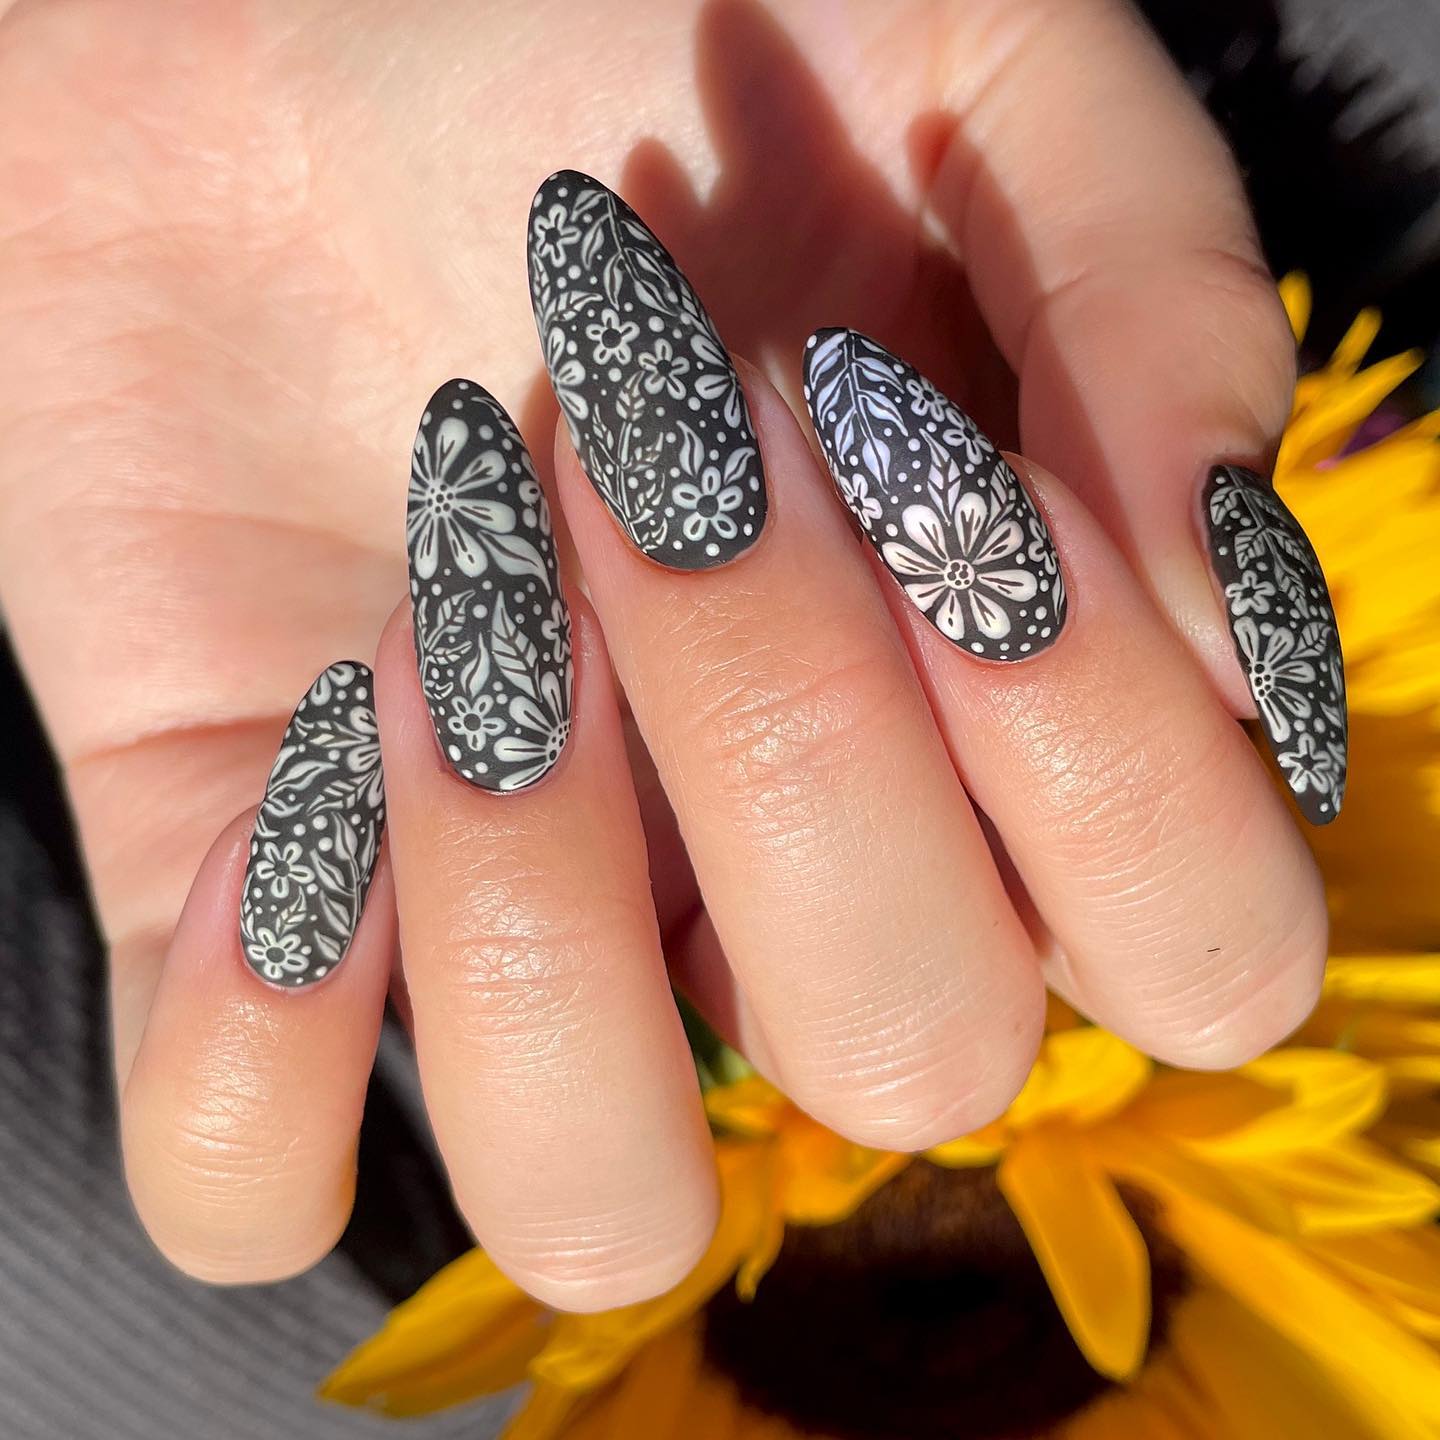 The matte black is a great color choice as it is so versatile. It works with a lot of different outfits and looks great on any skin tone. To make it greater, white flower nail art can be used to offer a very pretty touch. The combination of these two is a perfect combo.